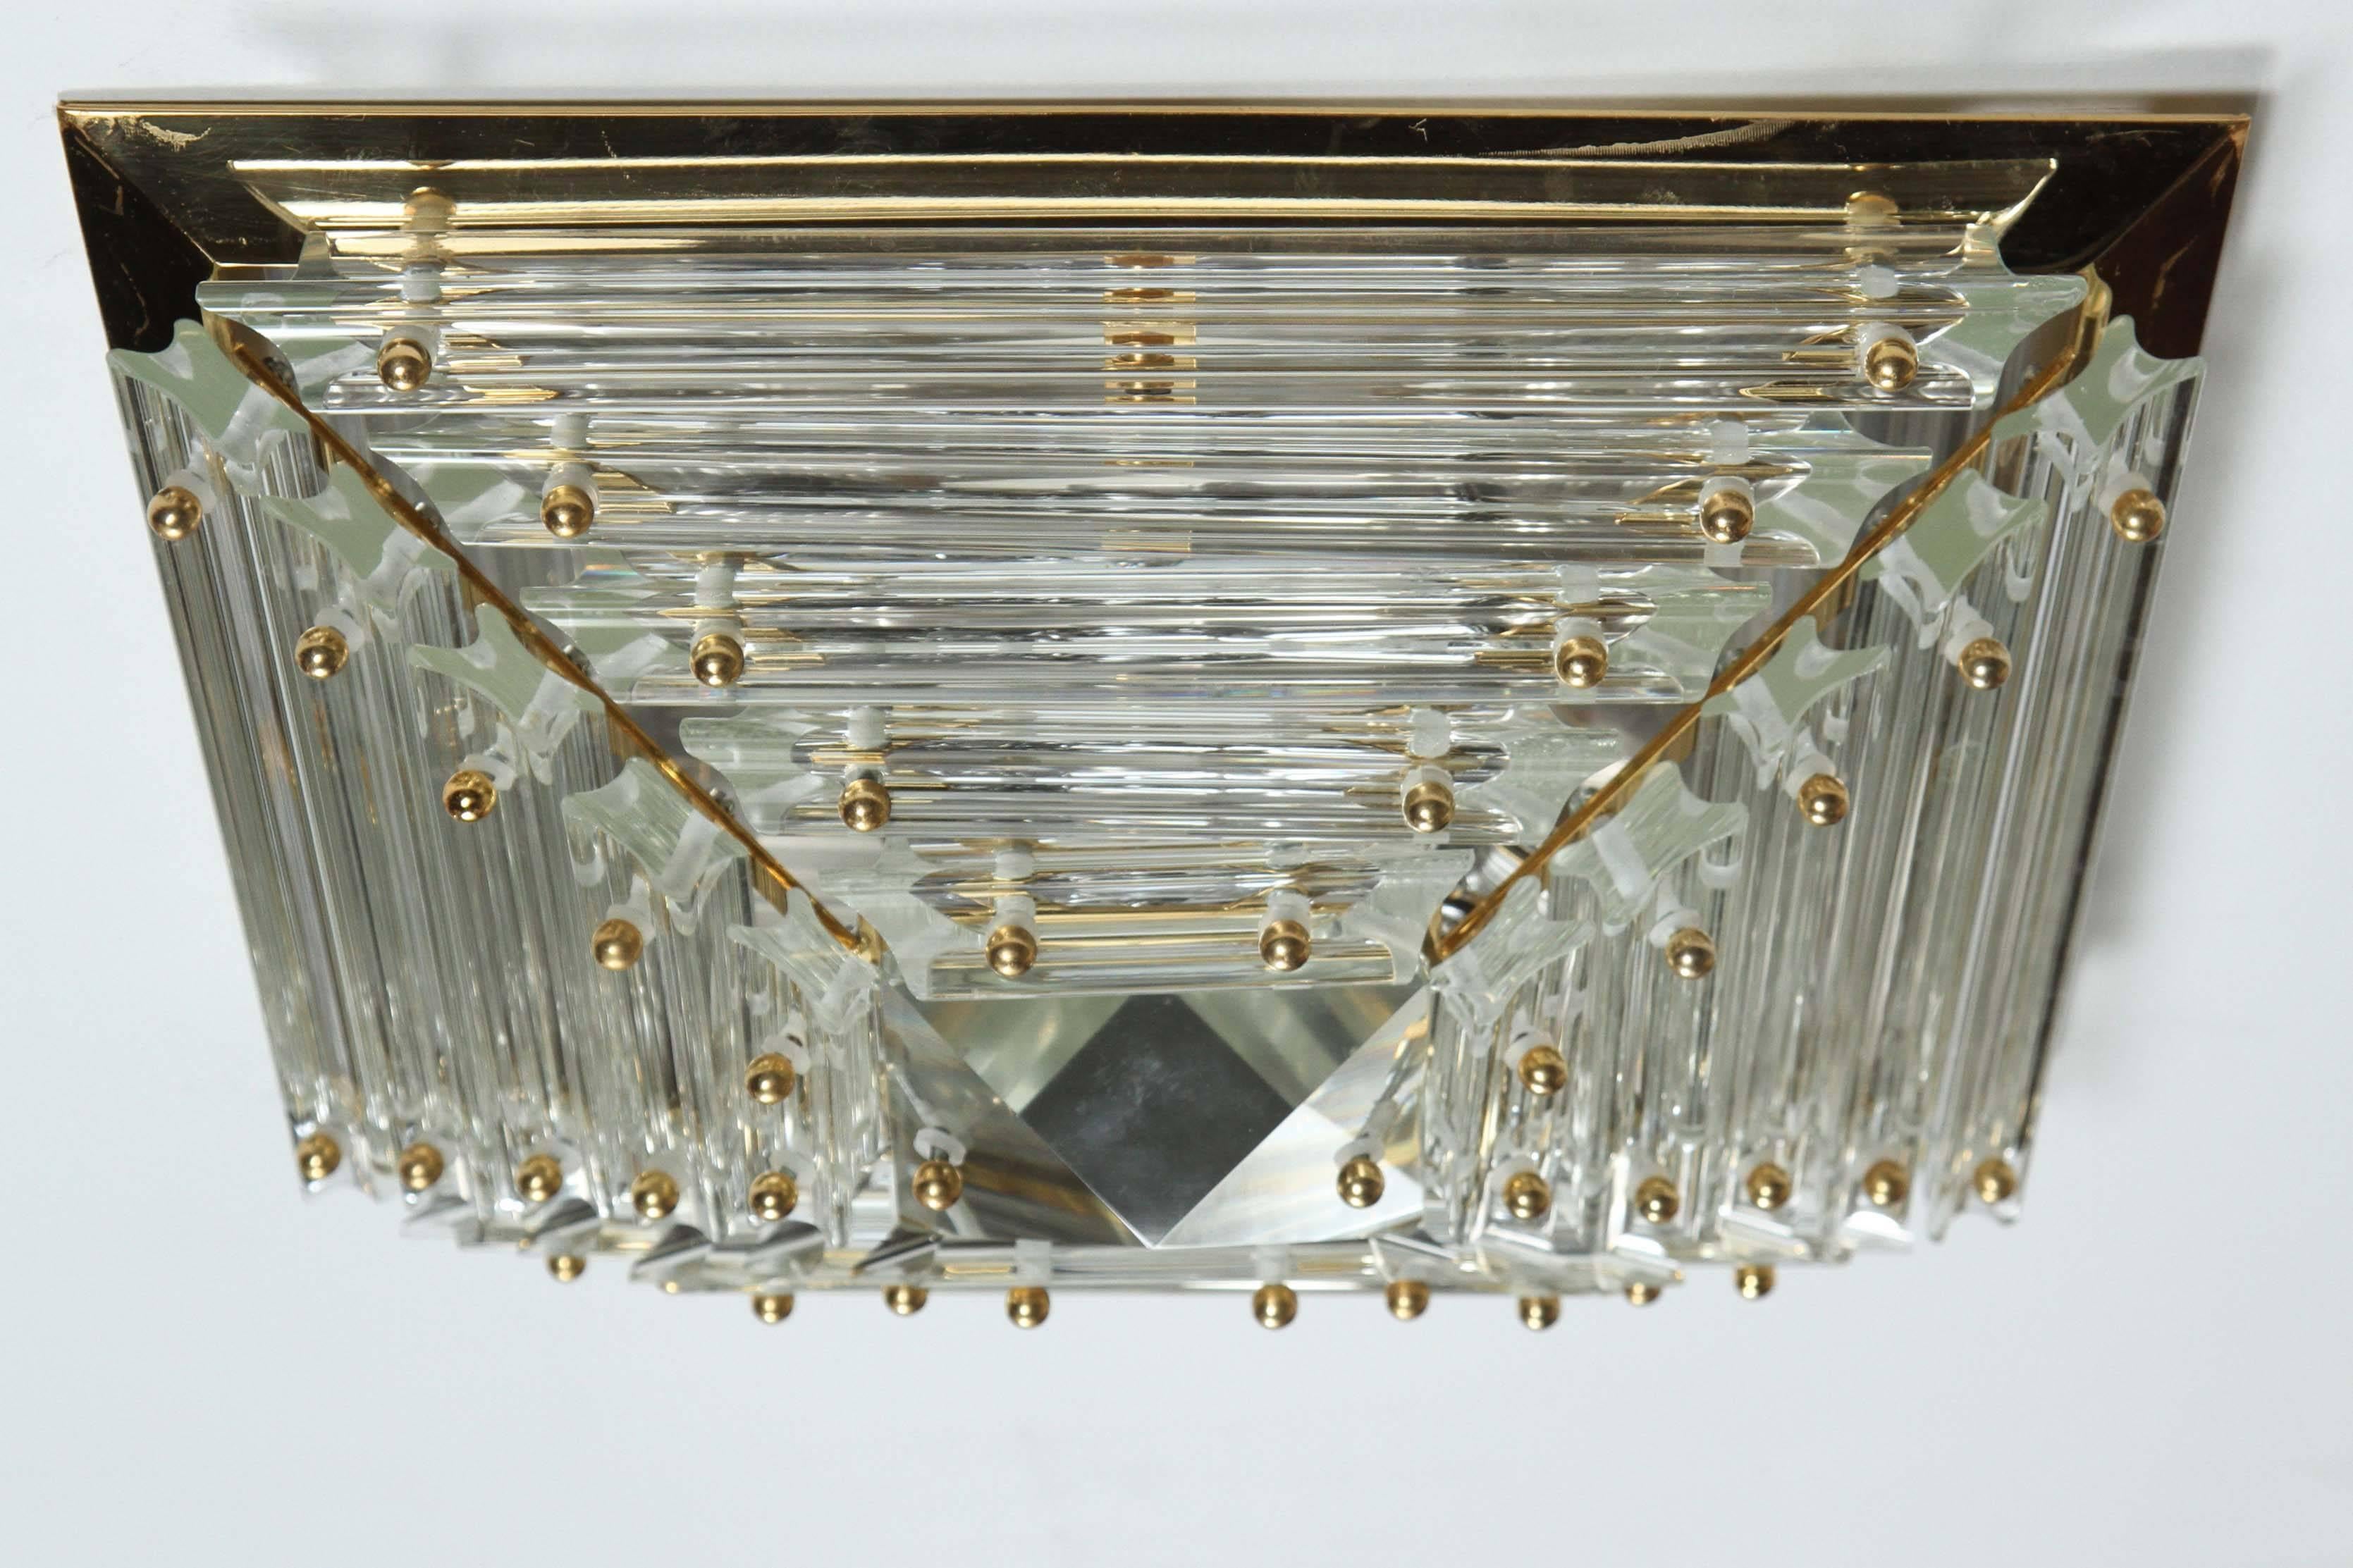 Pyramidal glass prisms flush mount fixture by Sciolari.
The glass prisms are arranged horizontally on a polished brass base to form a pyramid. They are held in place by small brass knobs. In the very center is a $